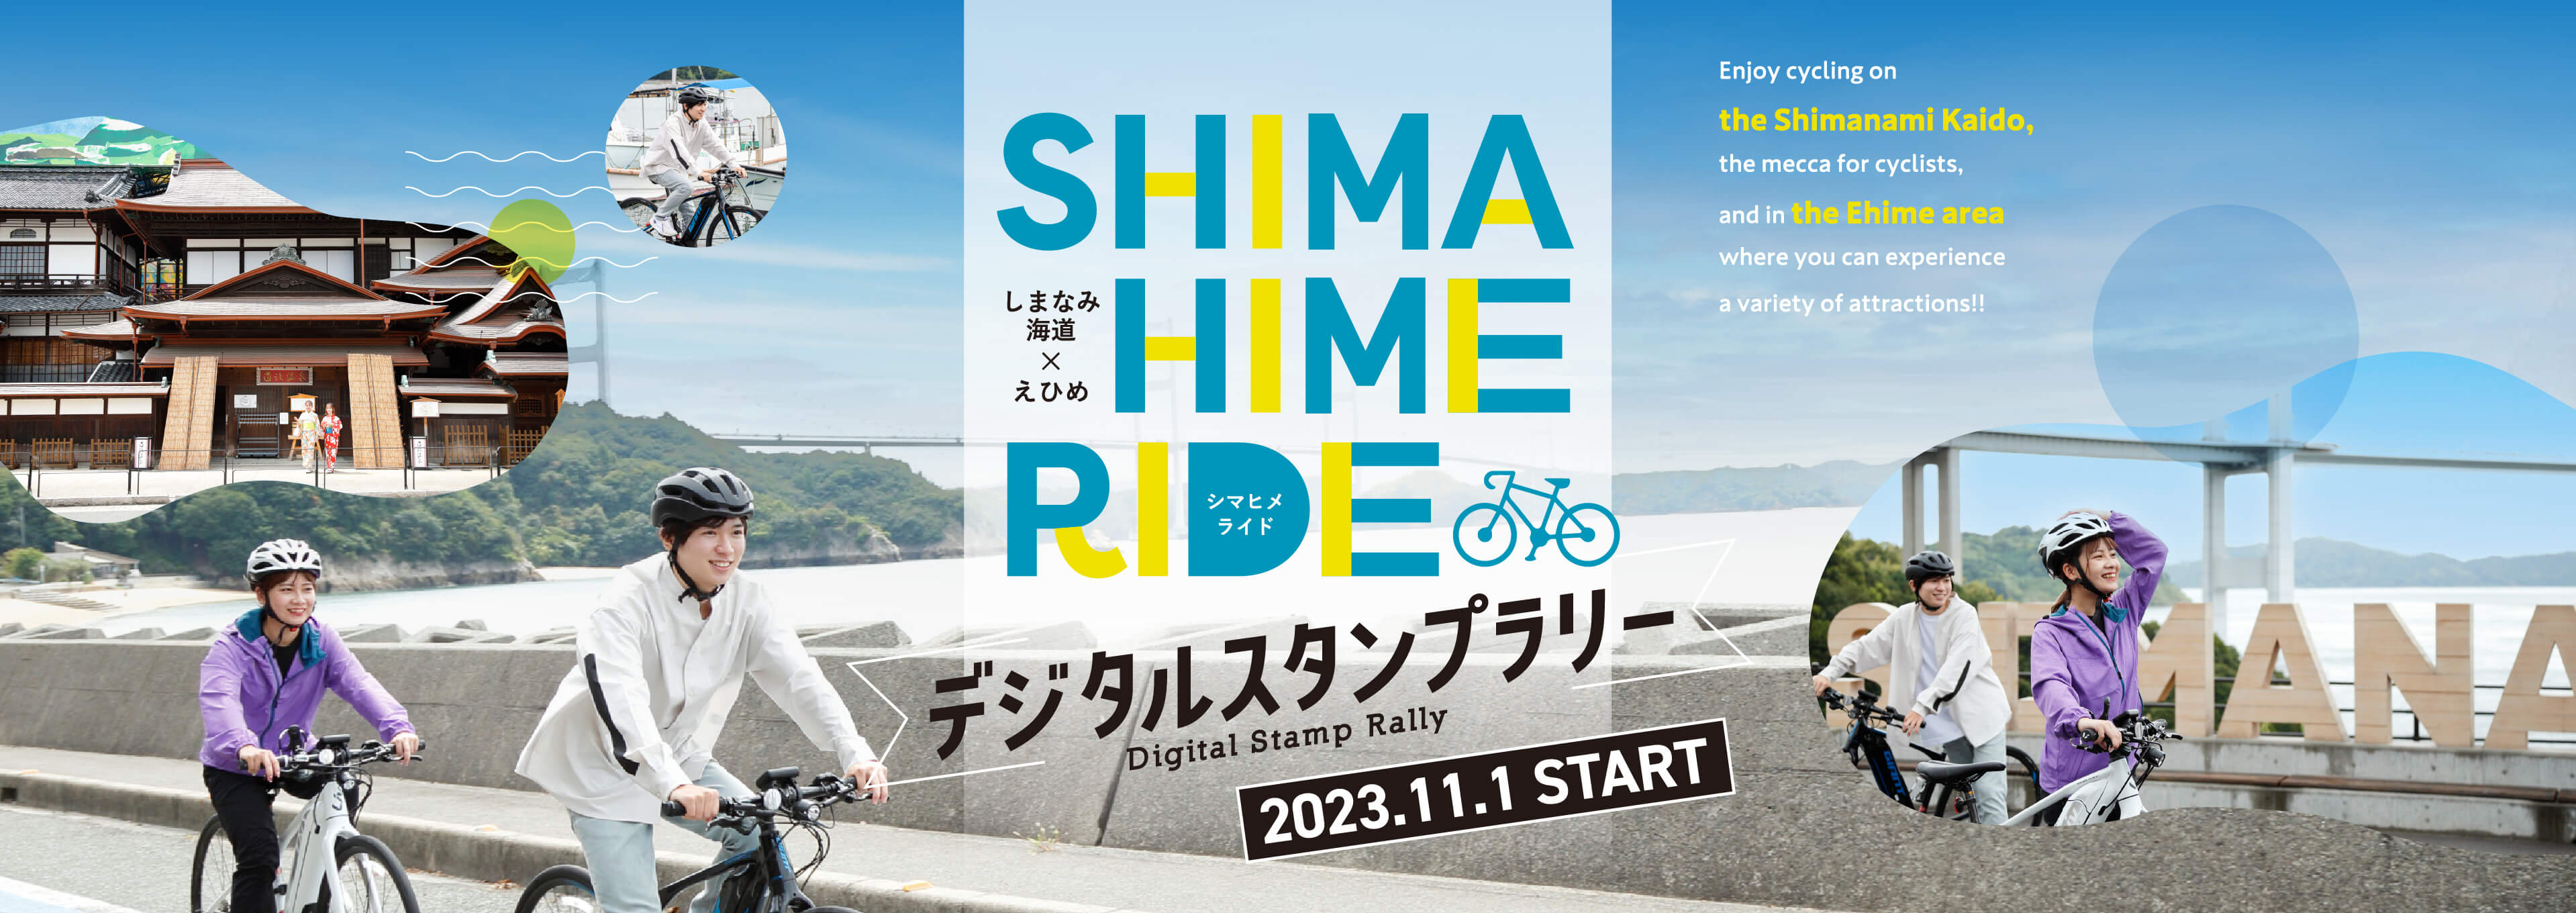 SHIMAHIMERIDE the Shimanami Kaido × the Ehime area Digital Stamp Rally 2023.11.1 START Enjoy cycling on the Shimanami Kaido,the mecca for cyclists,and in the Ehime area where you can experience a variety of attractions!!